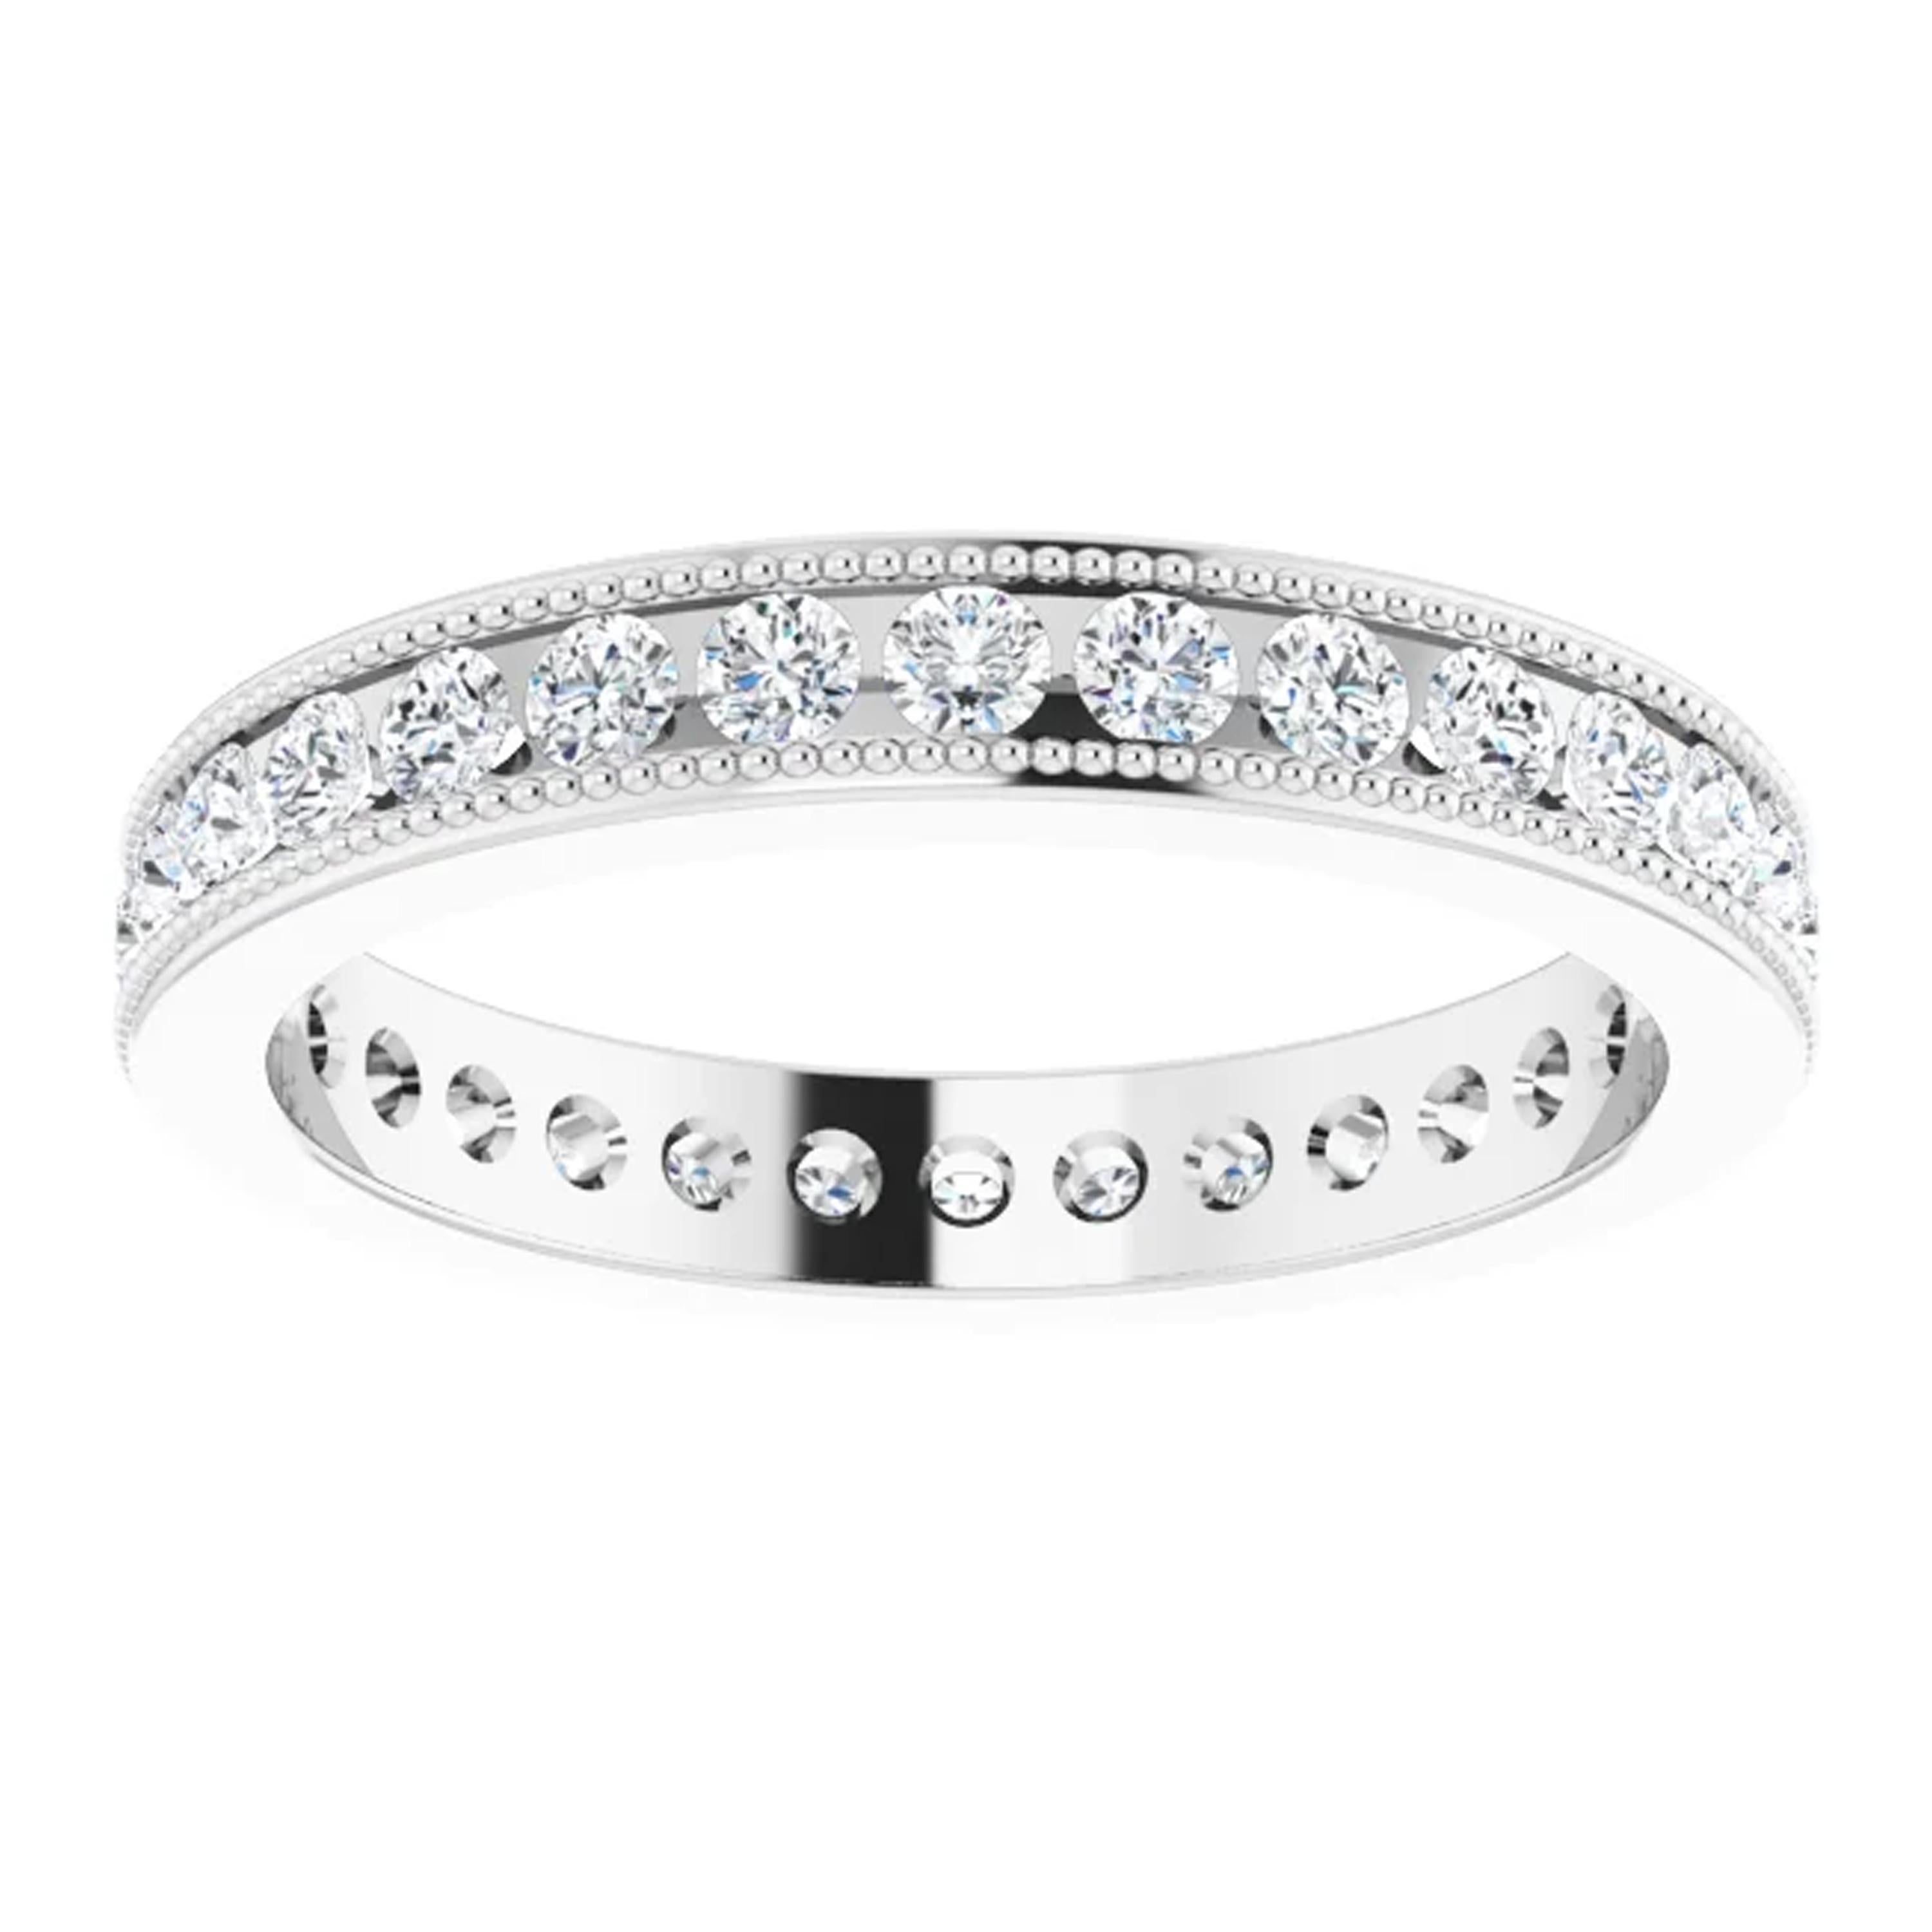 Inspired by the Victorian era, this vintage style eternity band is decorated with intricate milgrain detailing along the edges. Full of fire natural diamonds are set closely together with exposed sides and an open back design. This type of channel